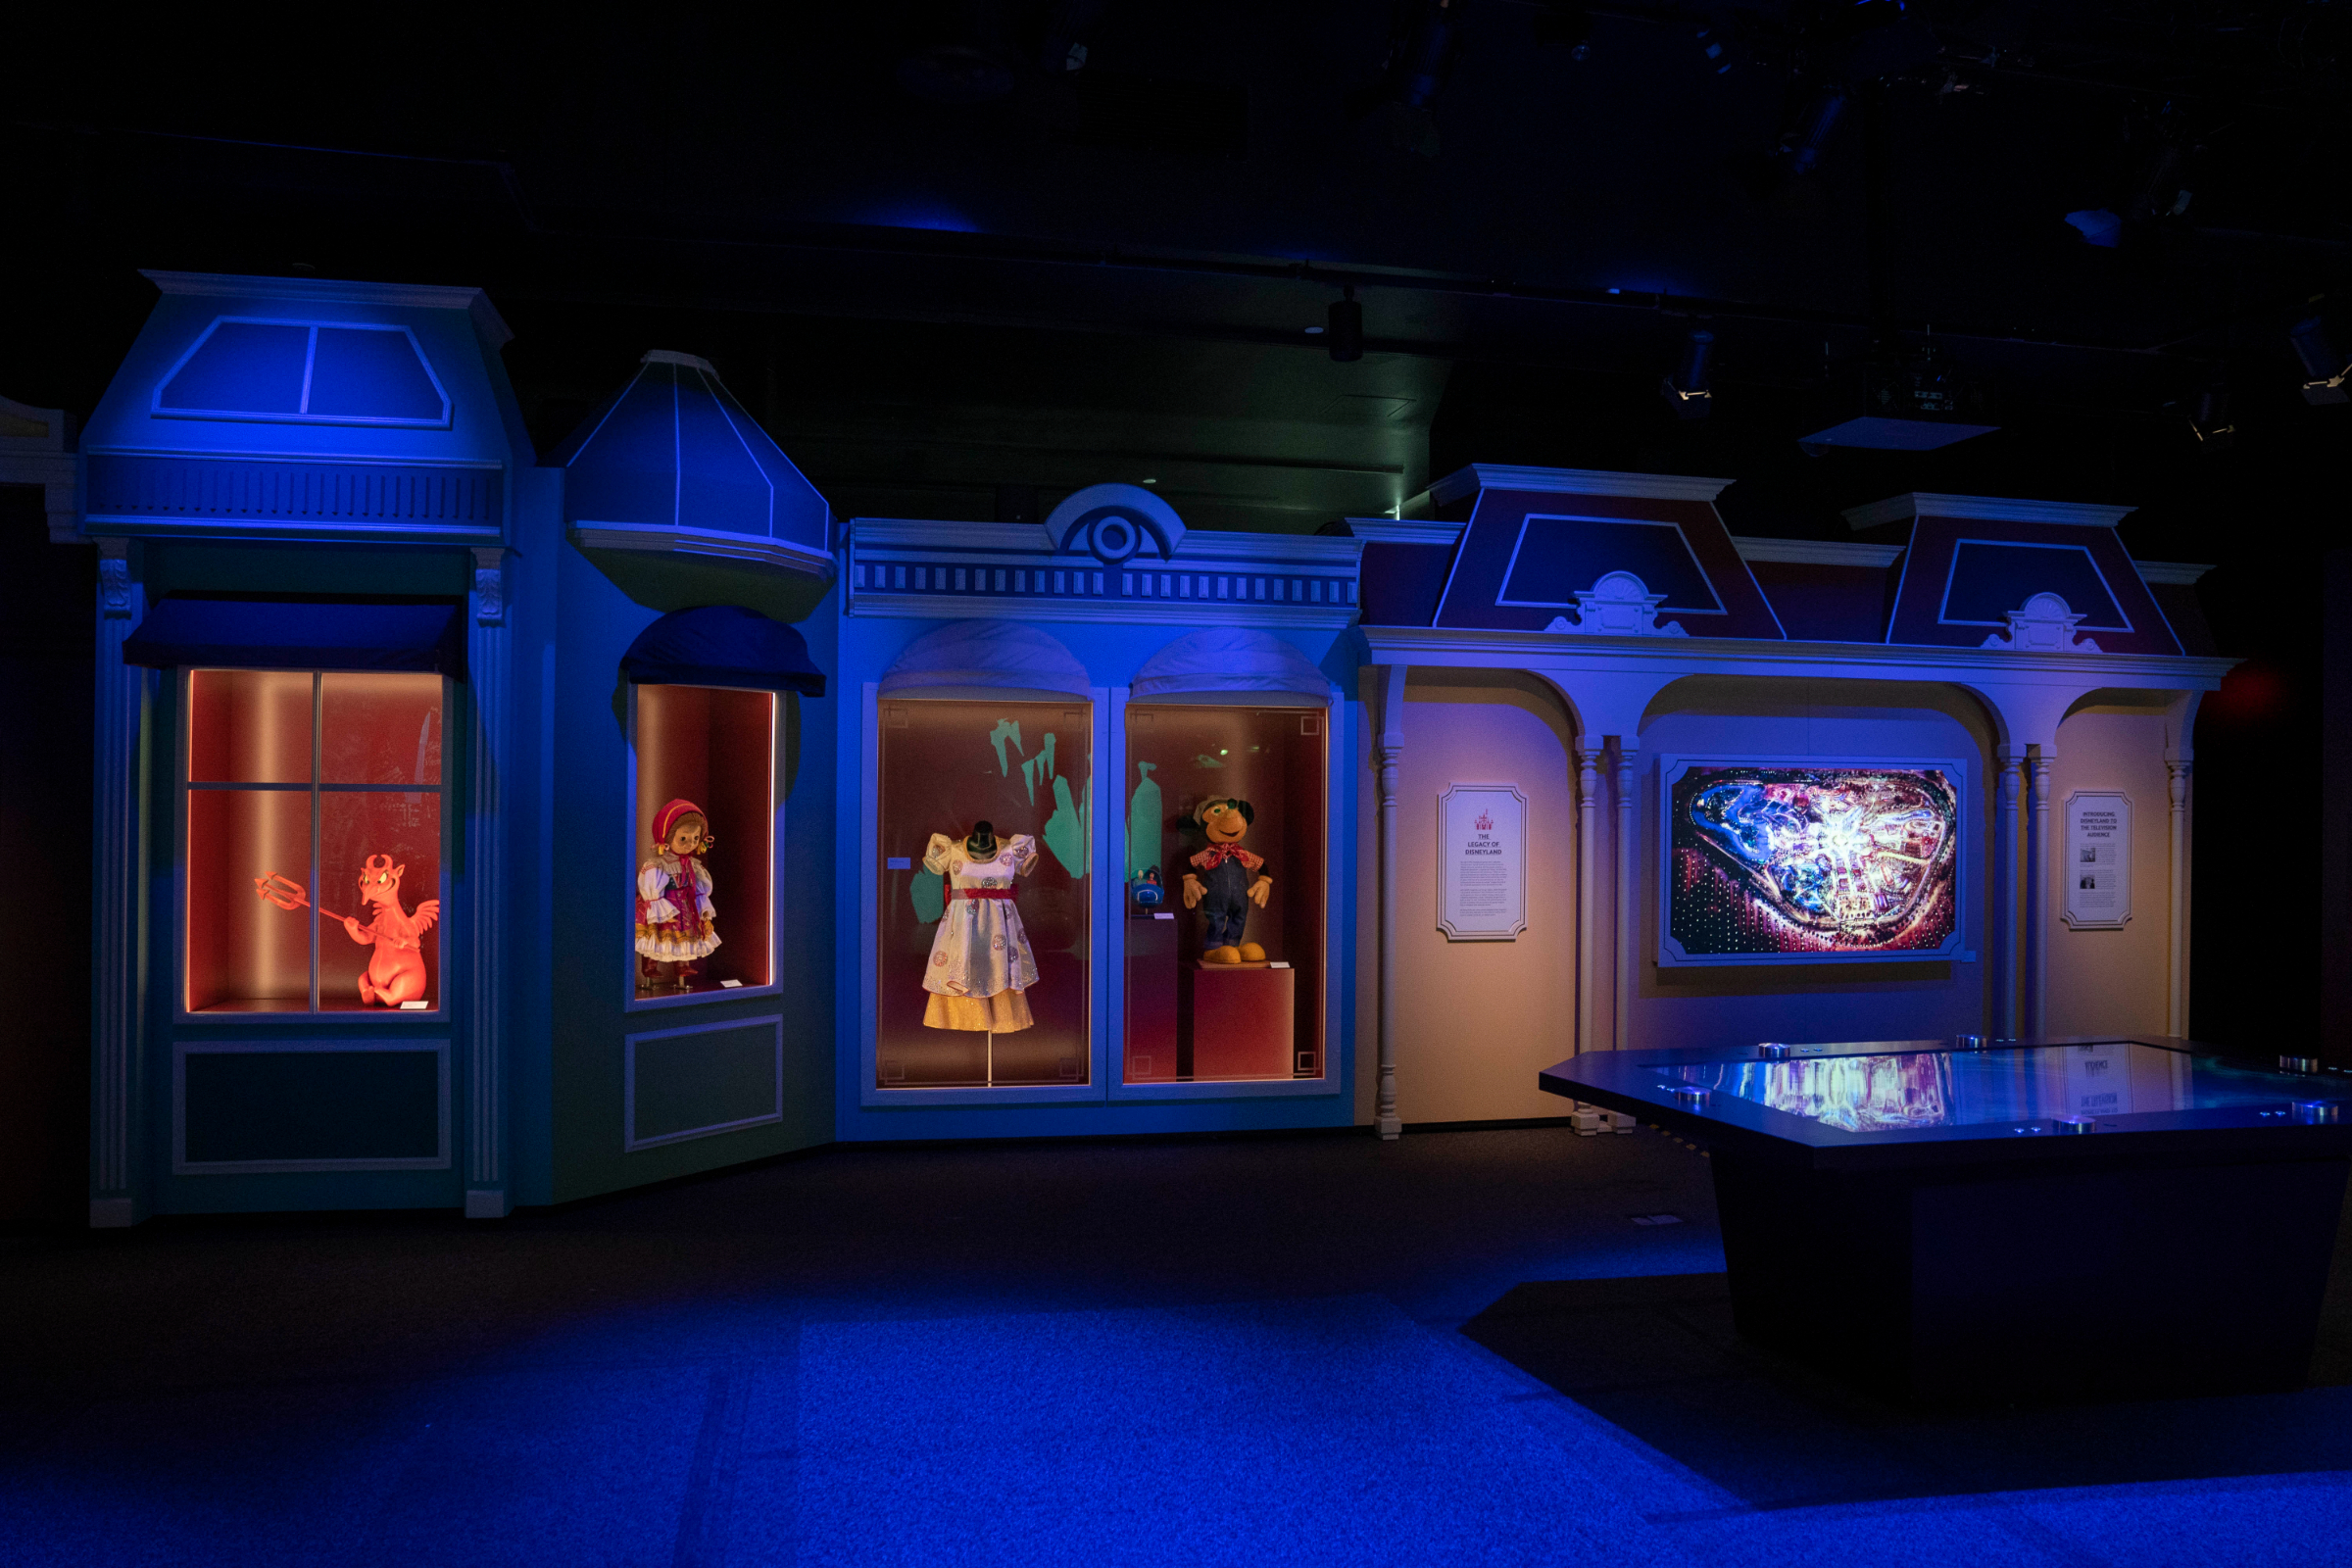 Your Disney World: A Day in the Parks gallery at Disney100: The Exhibition, now open at The Franklin Institute in Philadelphia. ©Disney